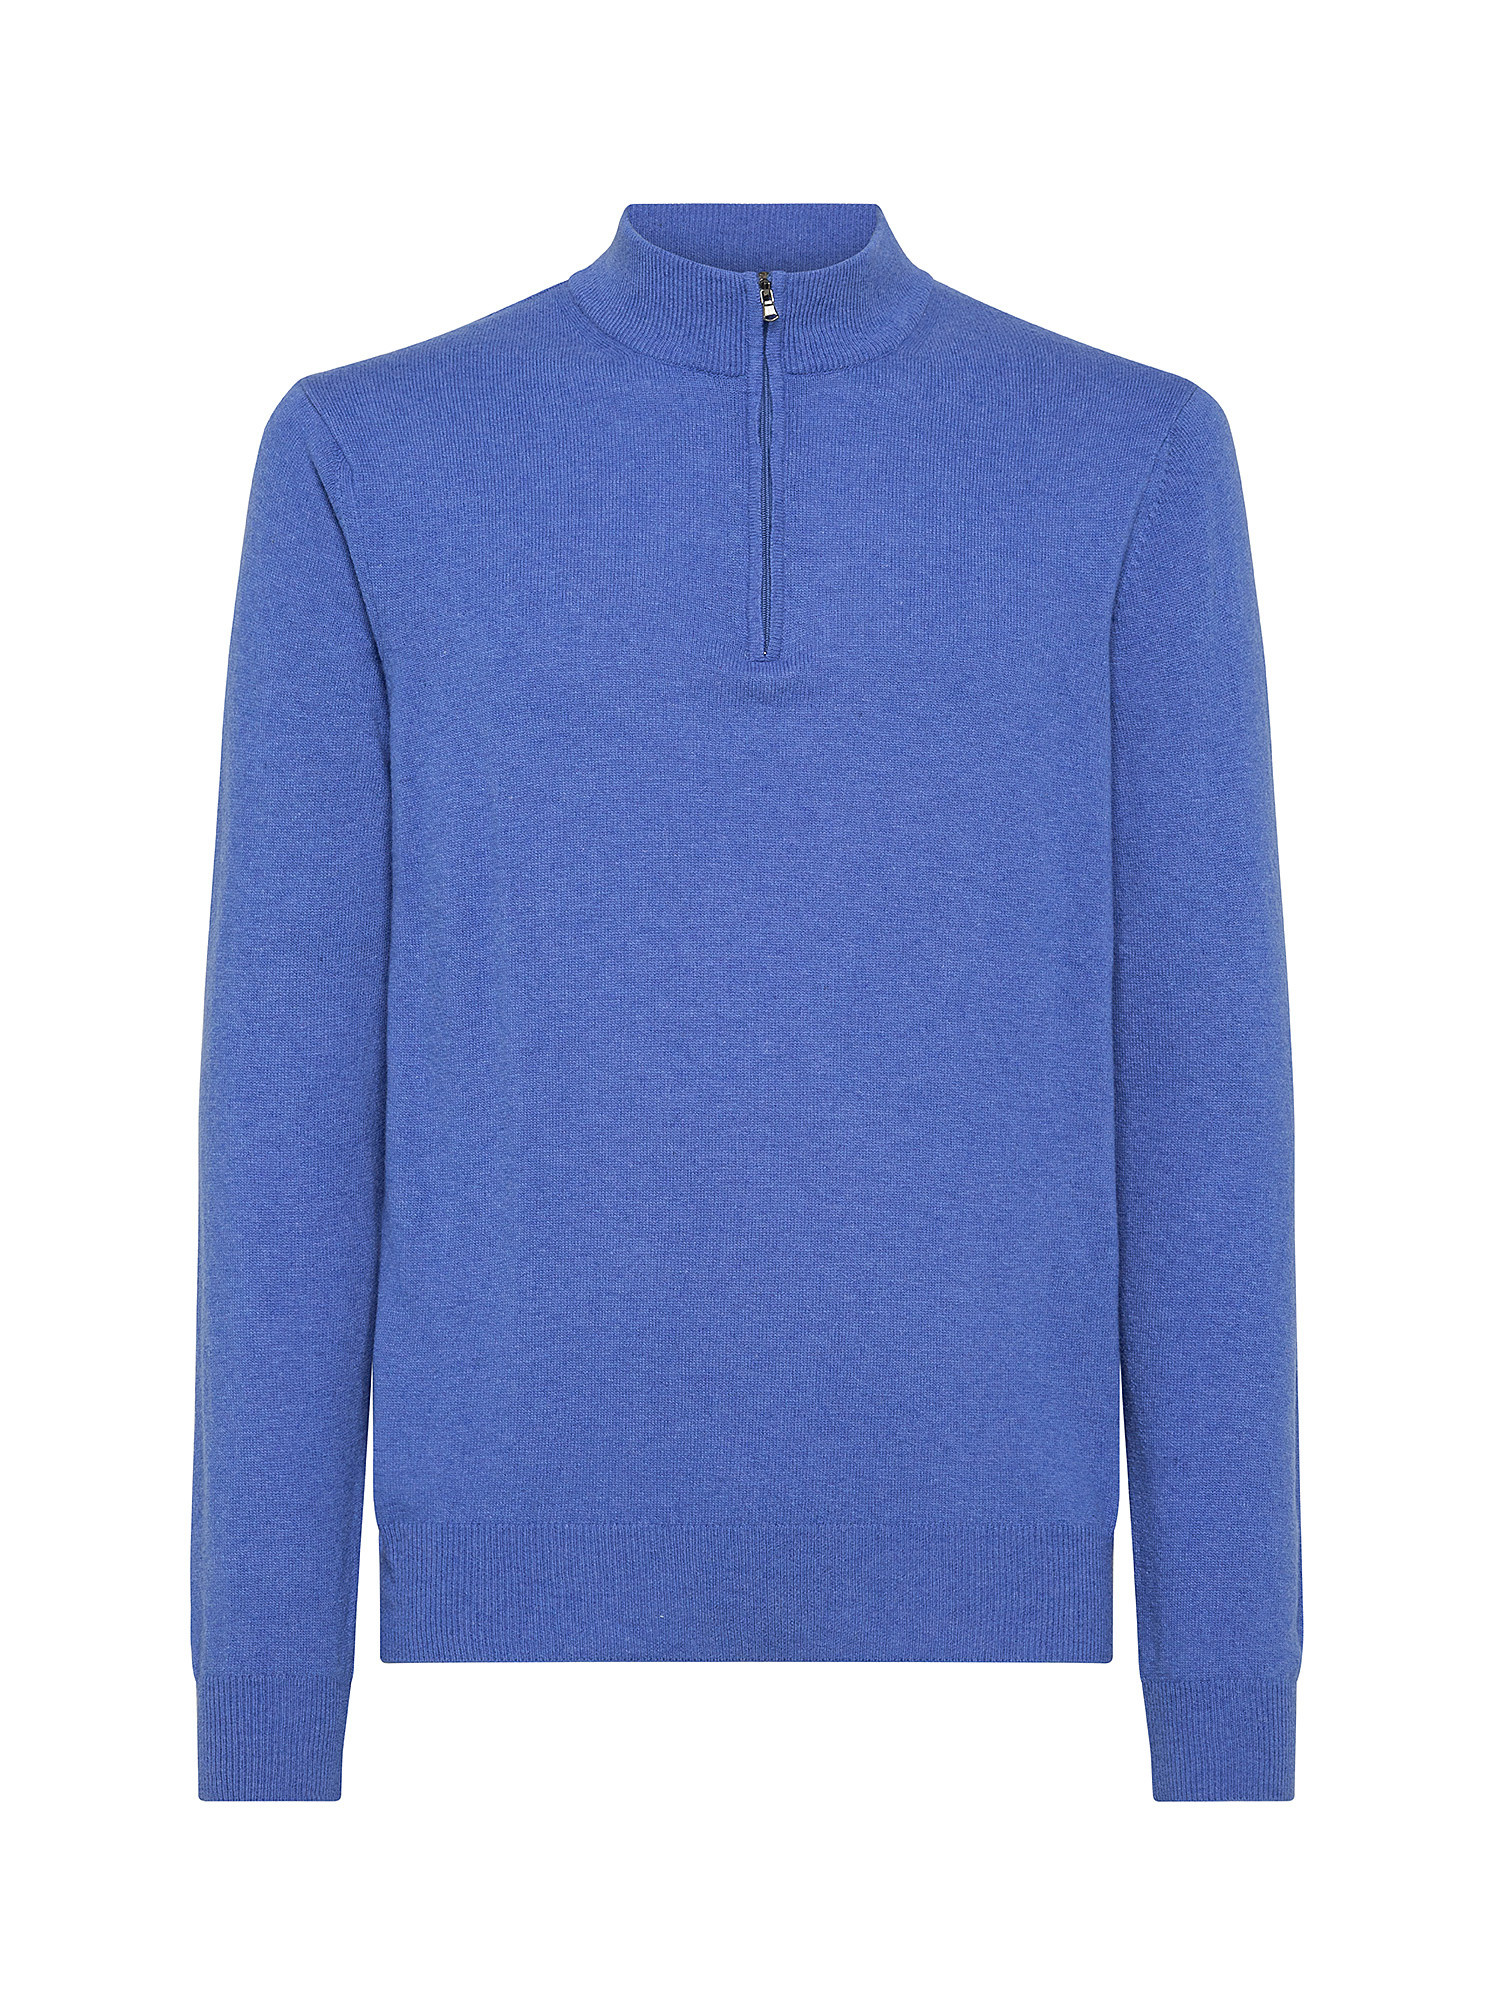 Half zip cardigan with Blend cashmere and noble fibers, Aviation Blue, large image number 0